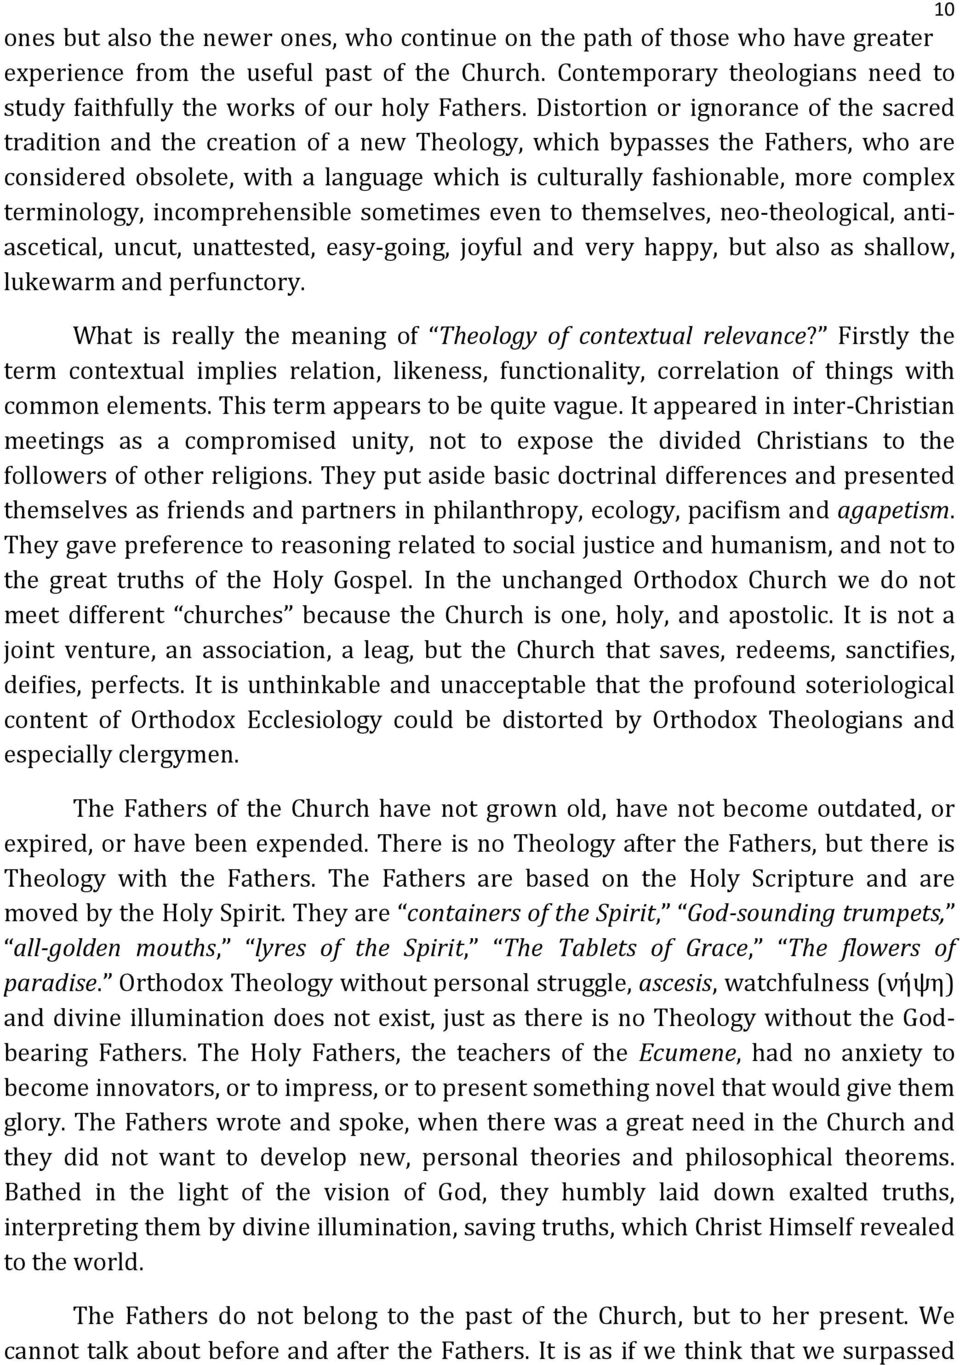 Distortion or ignorance of the sacred tradition and the creation of a new Theology, which bypasses the Fathers, who are considered obsolete, with a language which is culturally fashionable, more